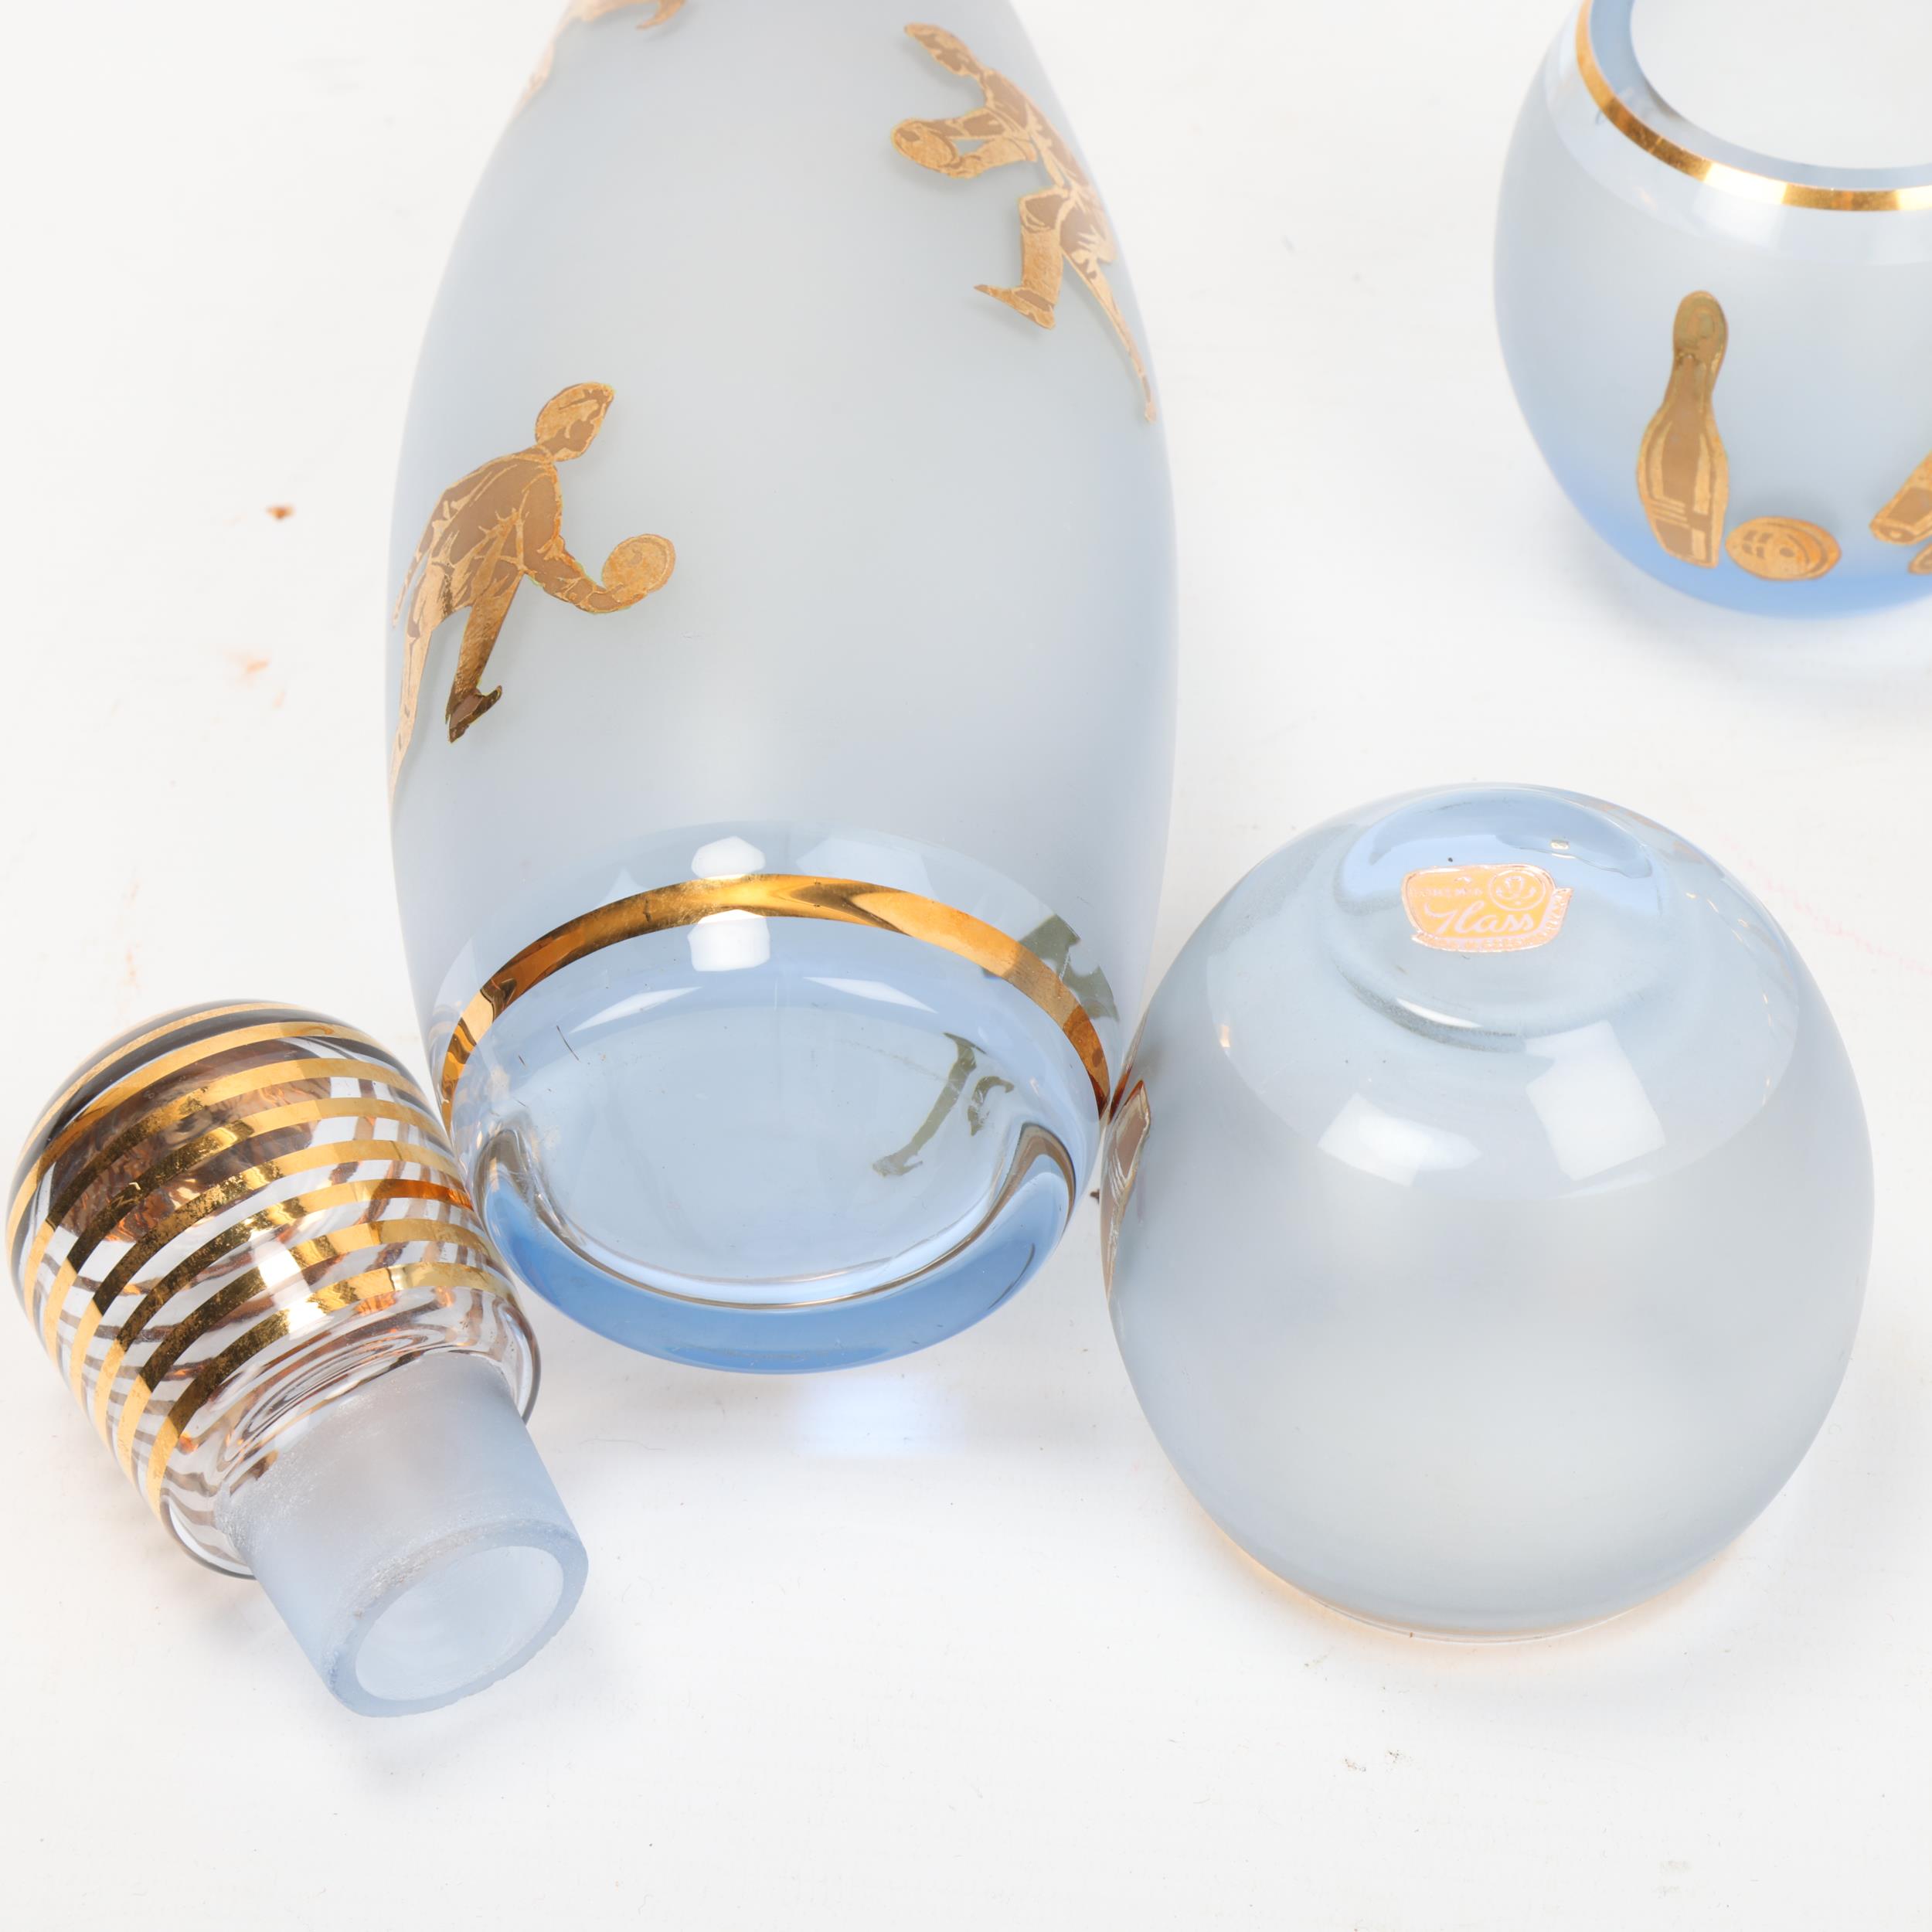 A mid 20th century frosted glass bowling pin decanter and 5 tumblers, with gilded bowling theme - Image 3 of 3